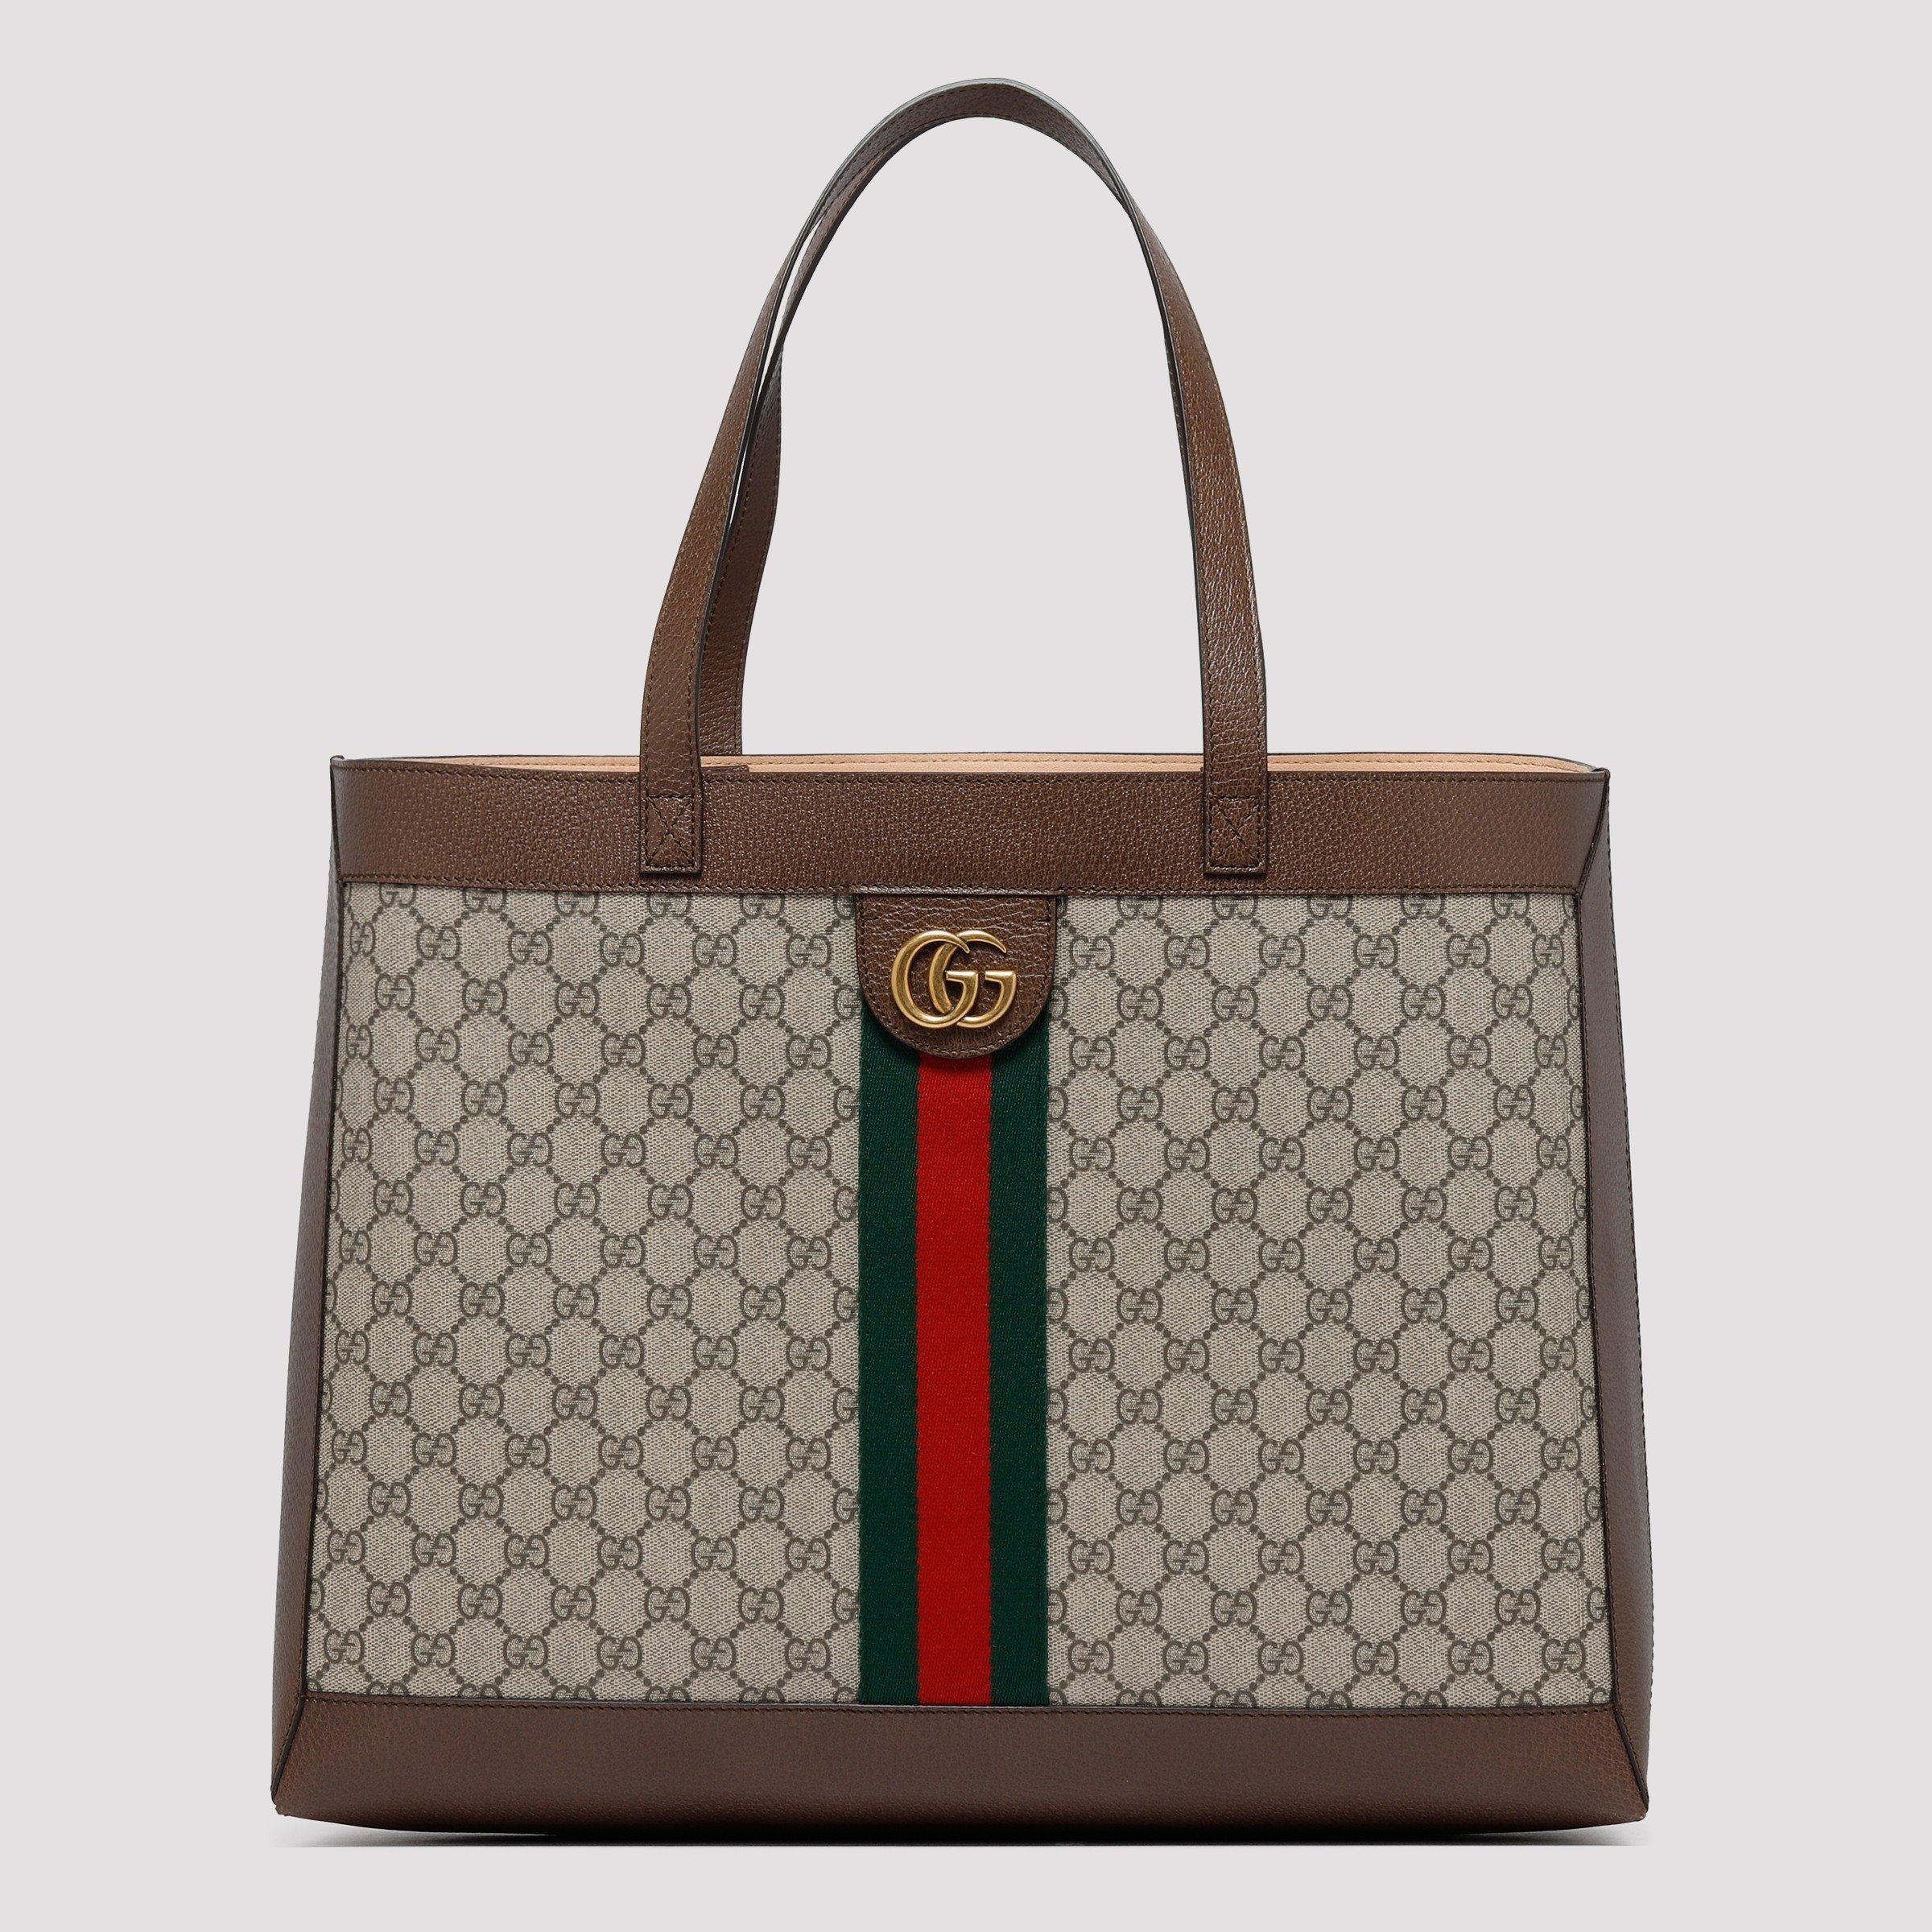 Gucci Leather Ophidia GG Supreme Medium Tote Bag in Brown - Lyst